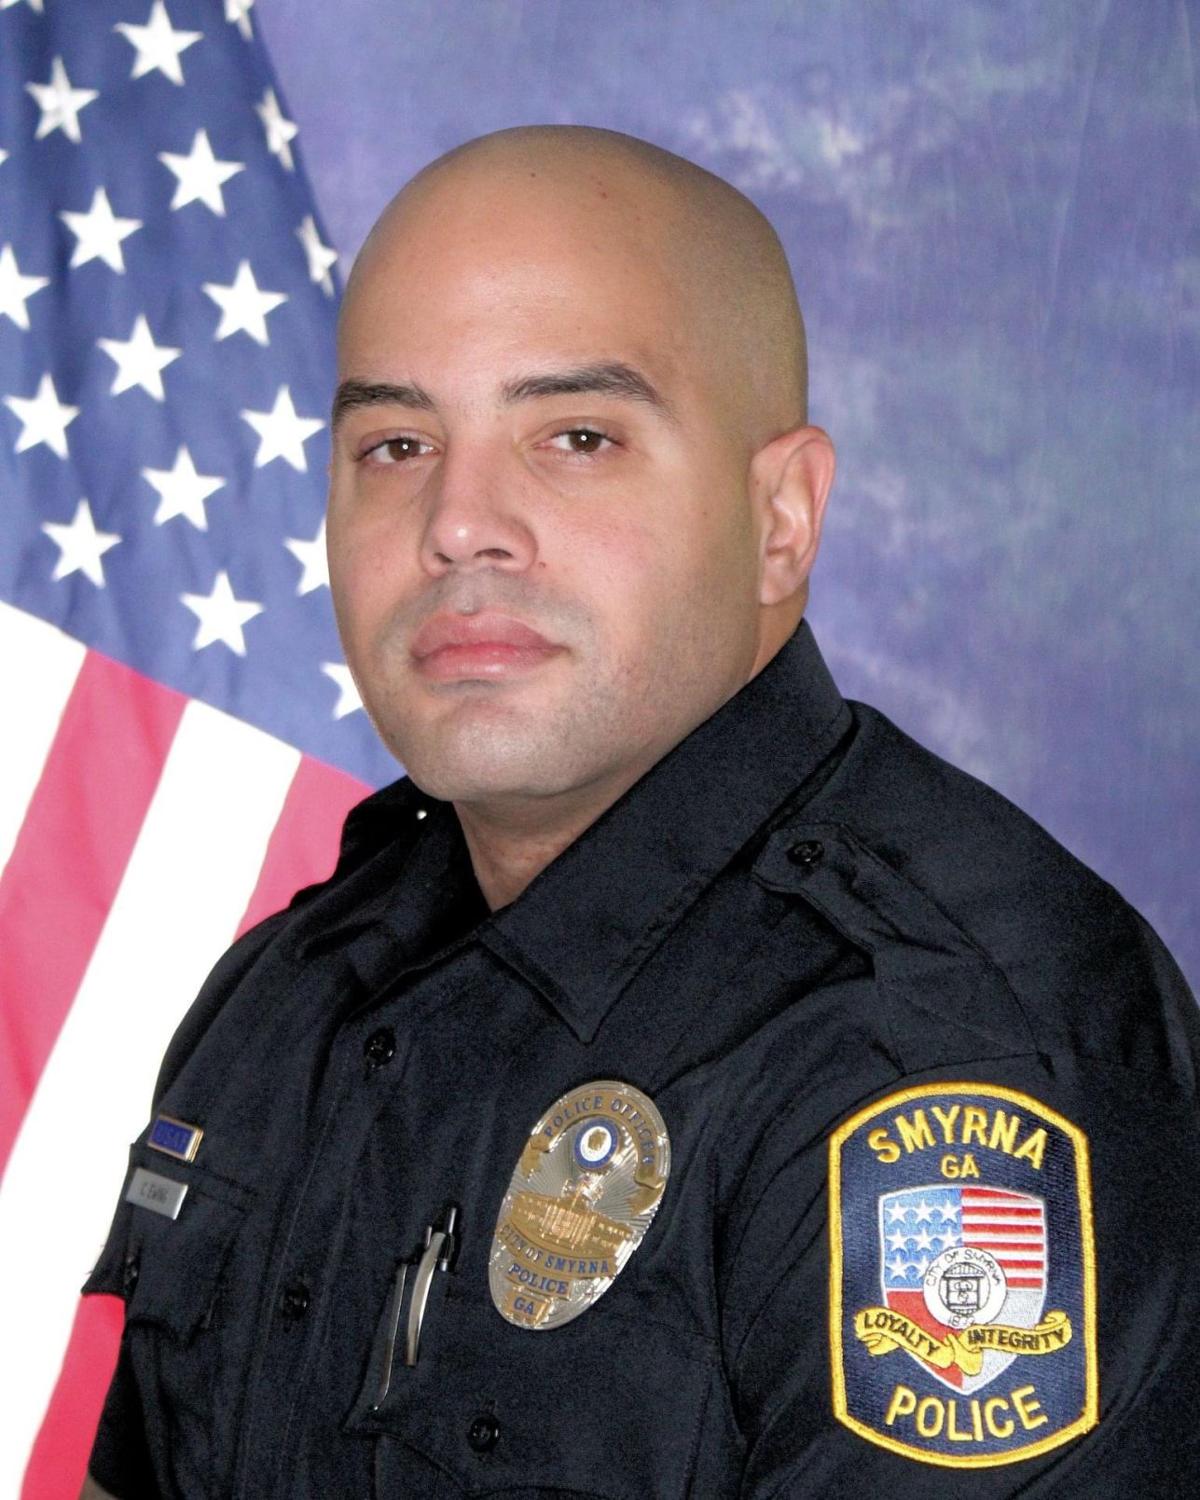 Police Officer Christopher Eric Ewing, Smyrna Police Department, Georgia